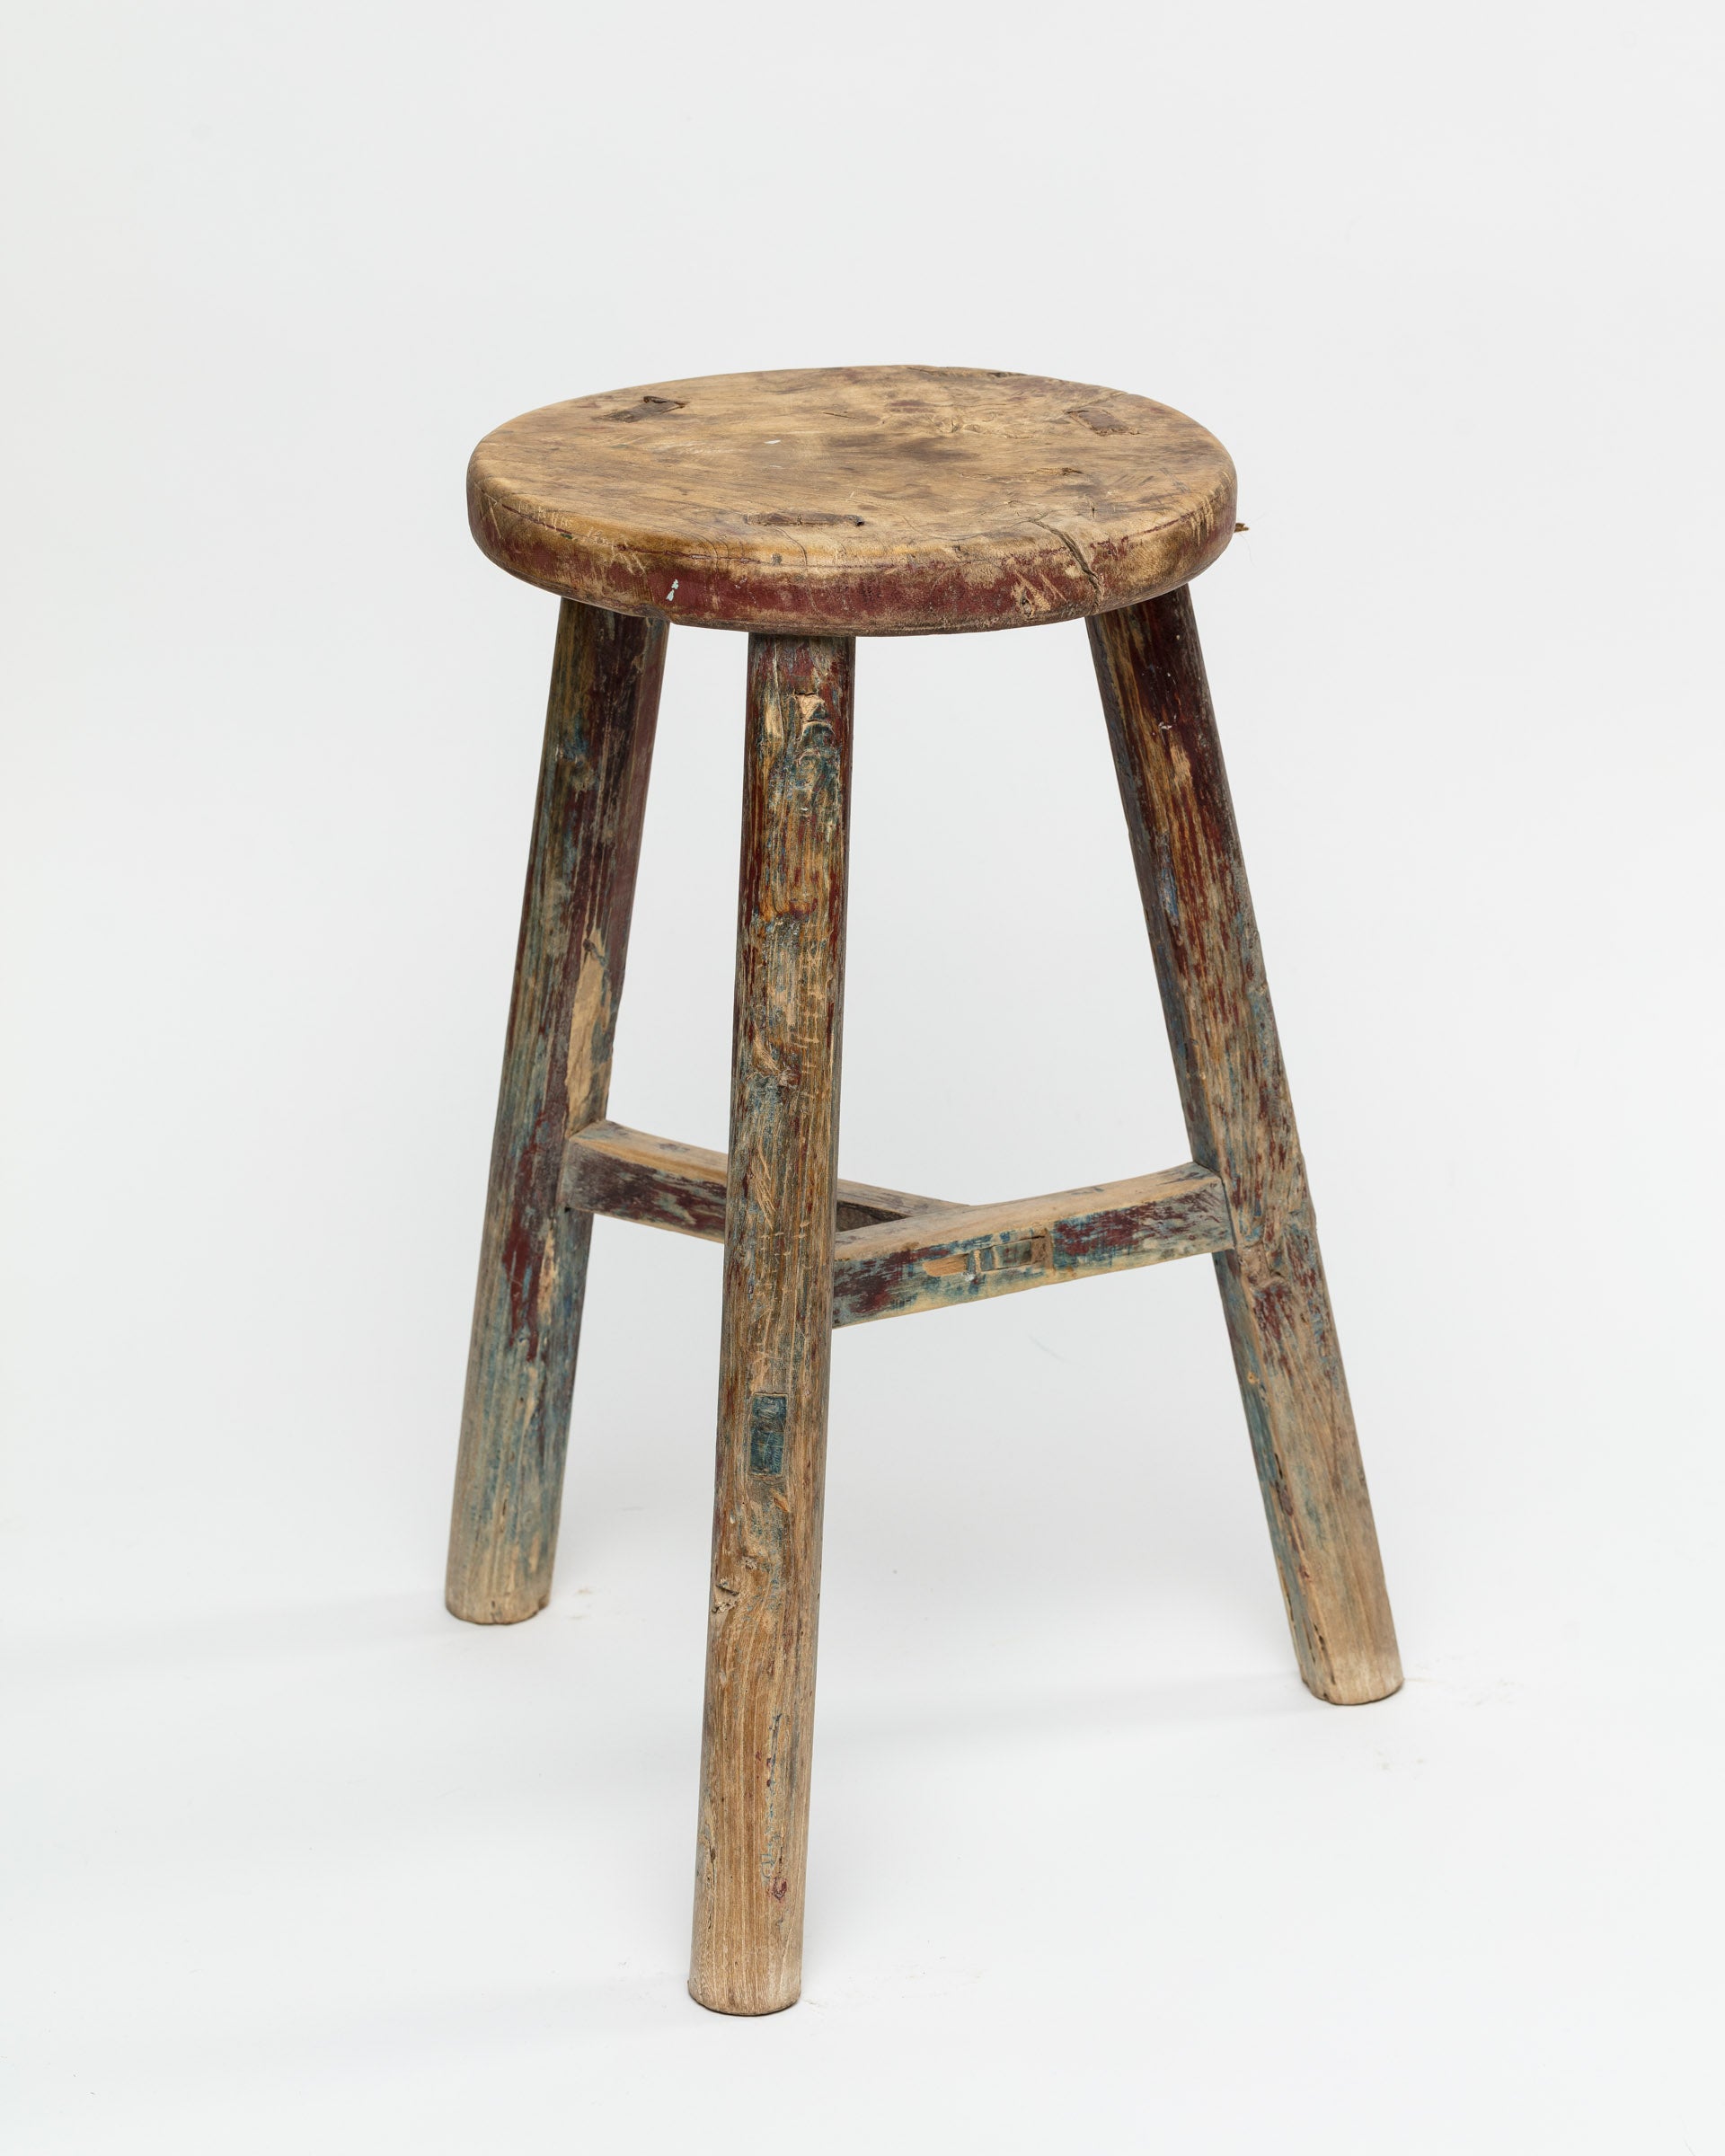 A well-worn ROUND STOOL 48 with visible paint remnants and signs of aging from a Scottsdale, Arizona bungalow, set against a white background. (Indus Design Imports)